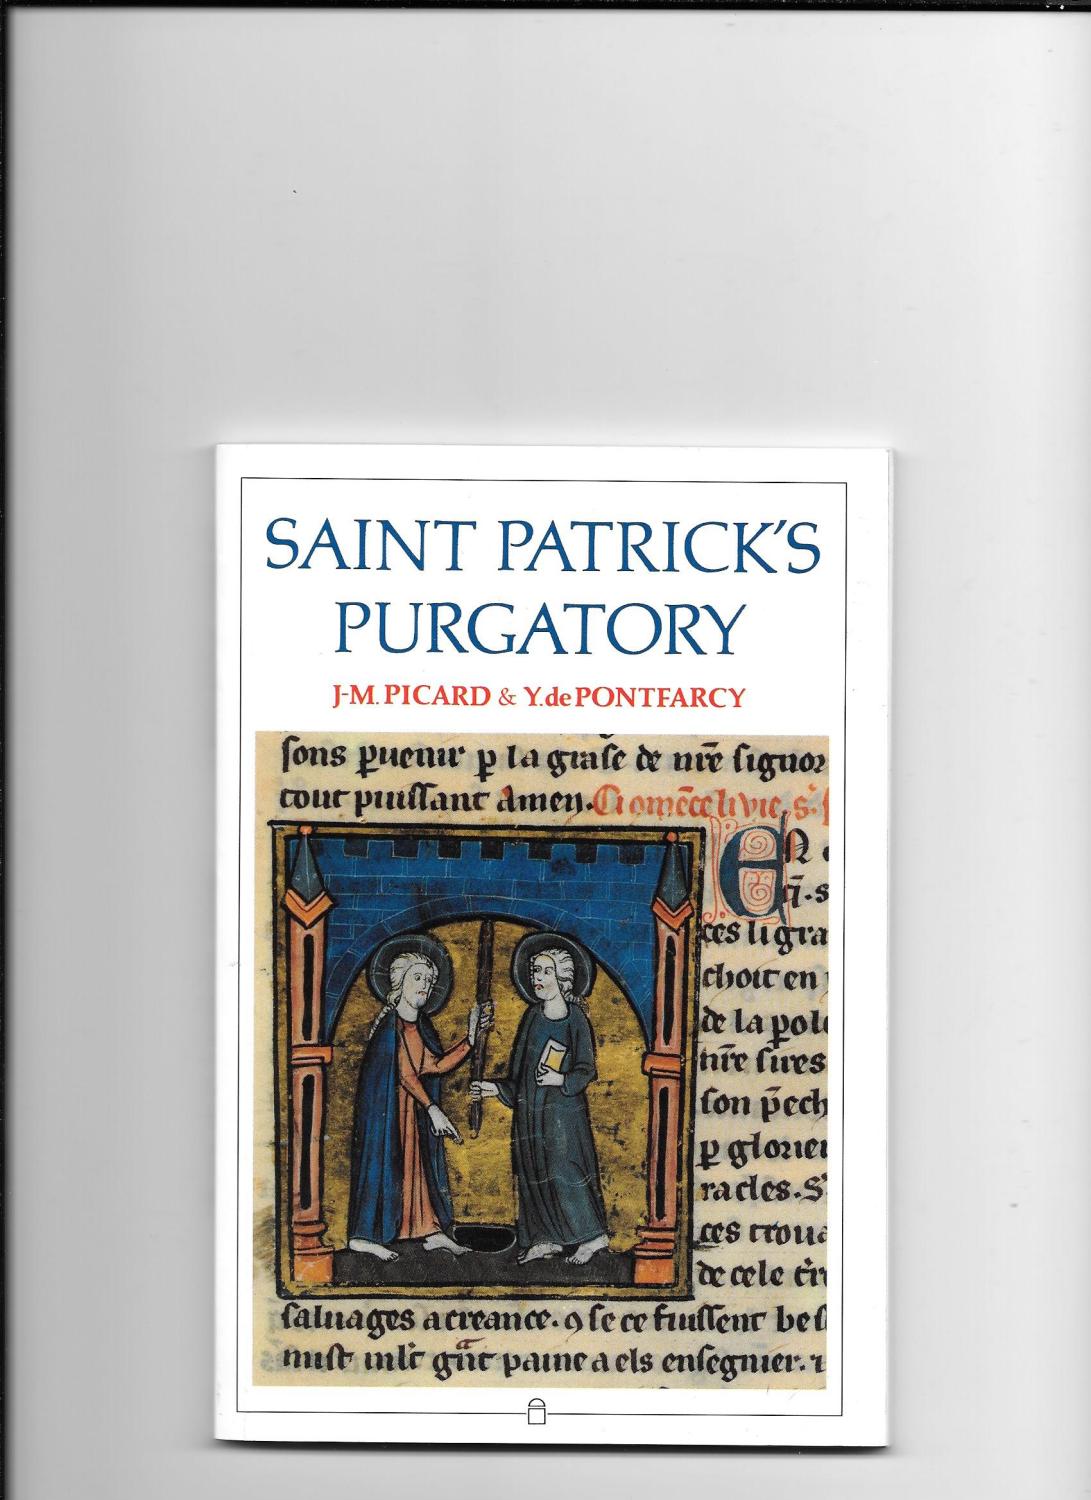 Saint Patrick's Purgatory. A Twelfth Century Tale of a Journey to the other World. - Picard, J.M. & Pontfarcy, Y. de